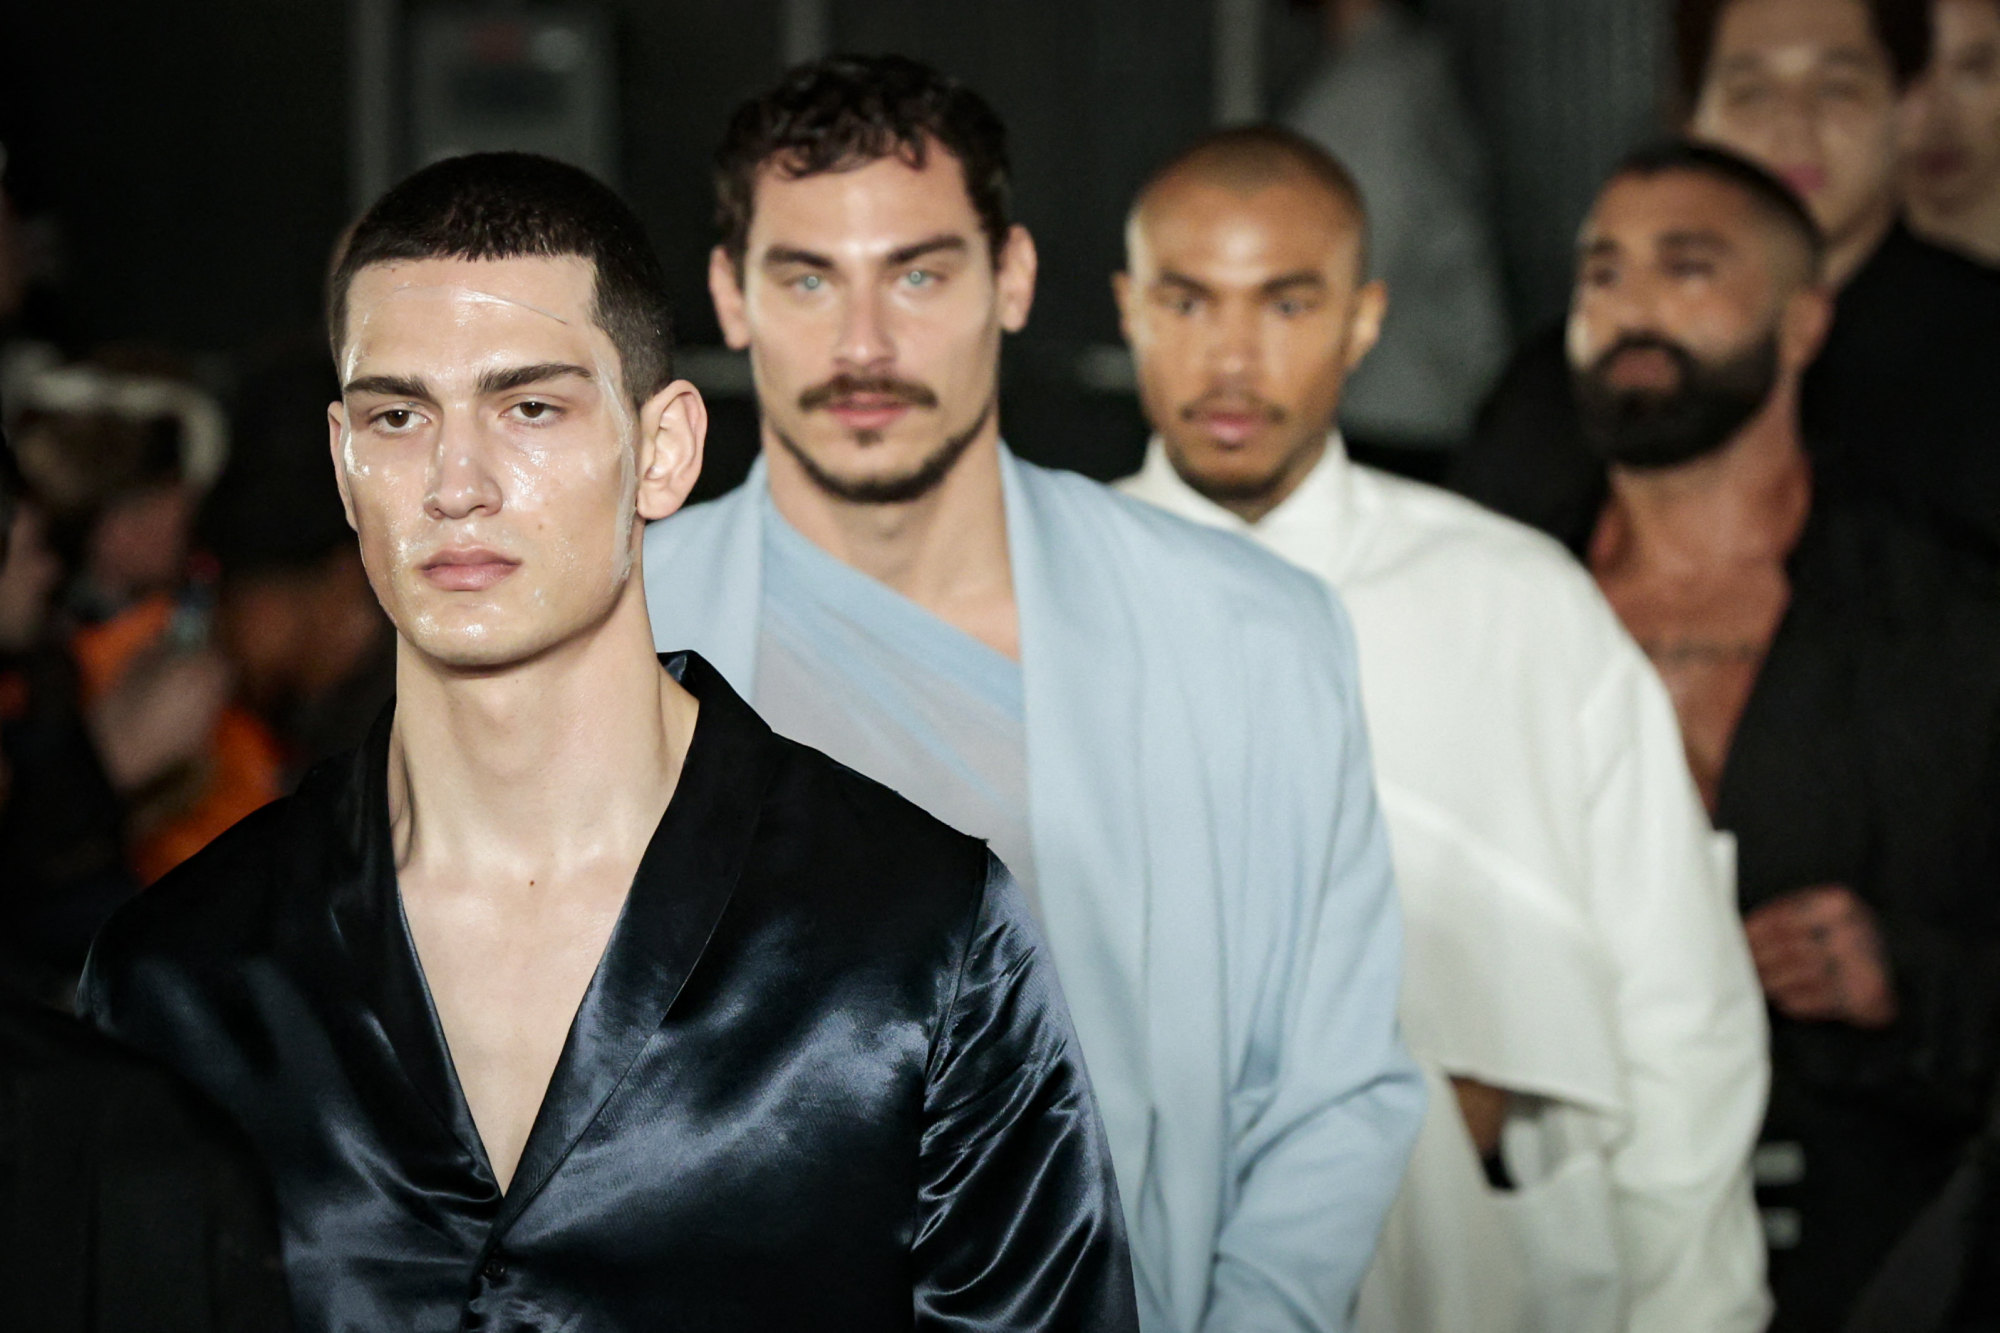 Paris Fashion Week 2023: 4 menswear highlights for AW23/24, from Emily ...